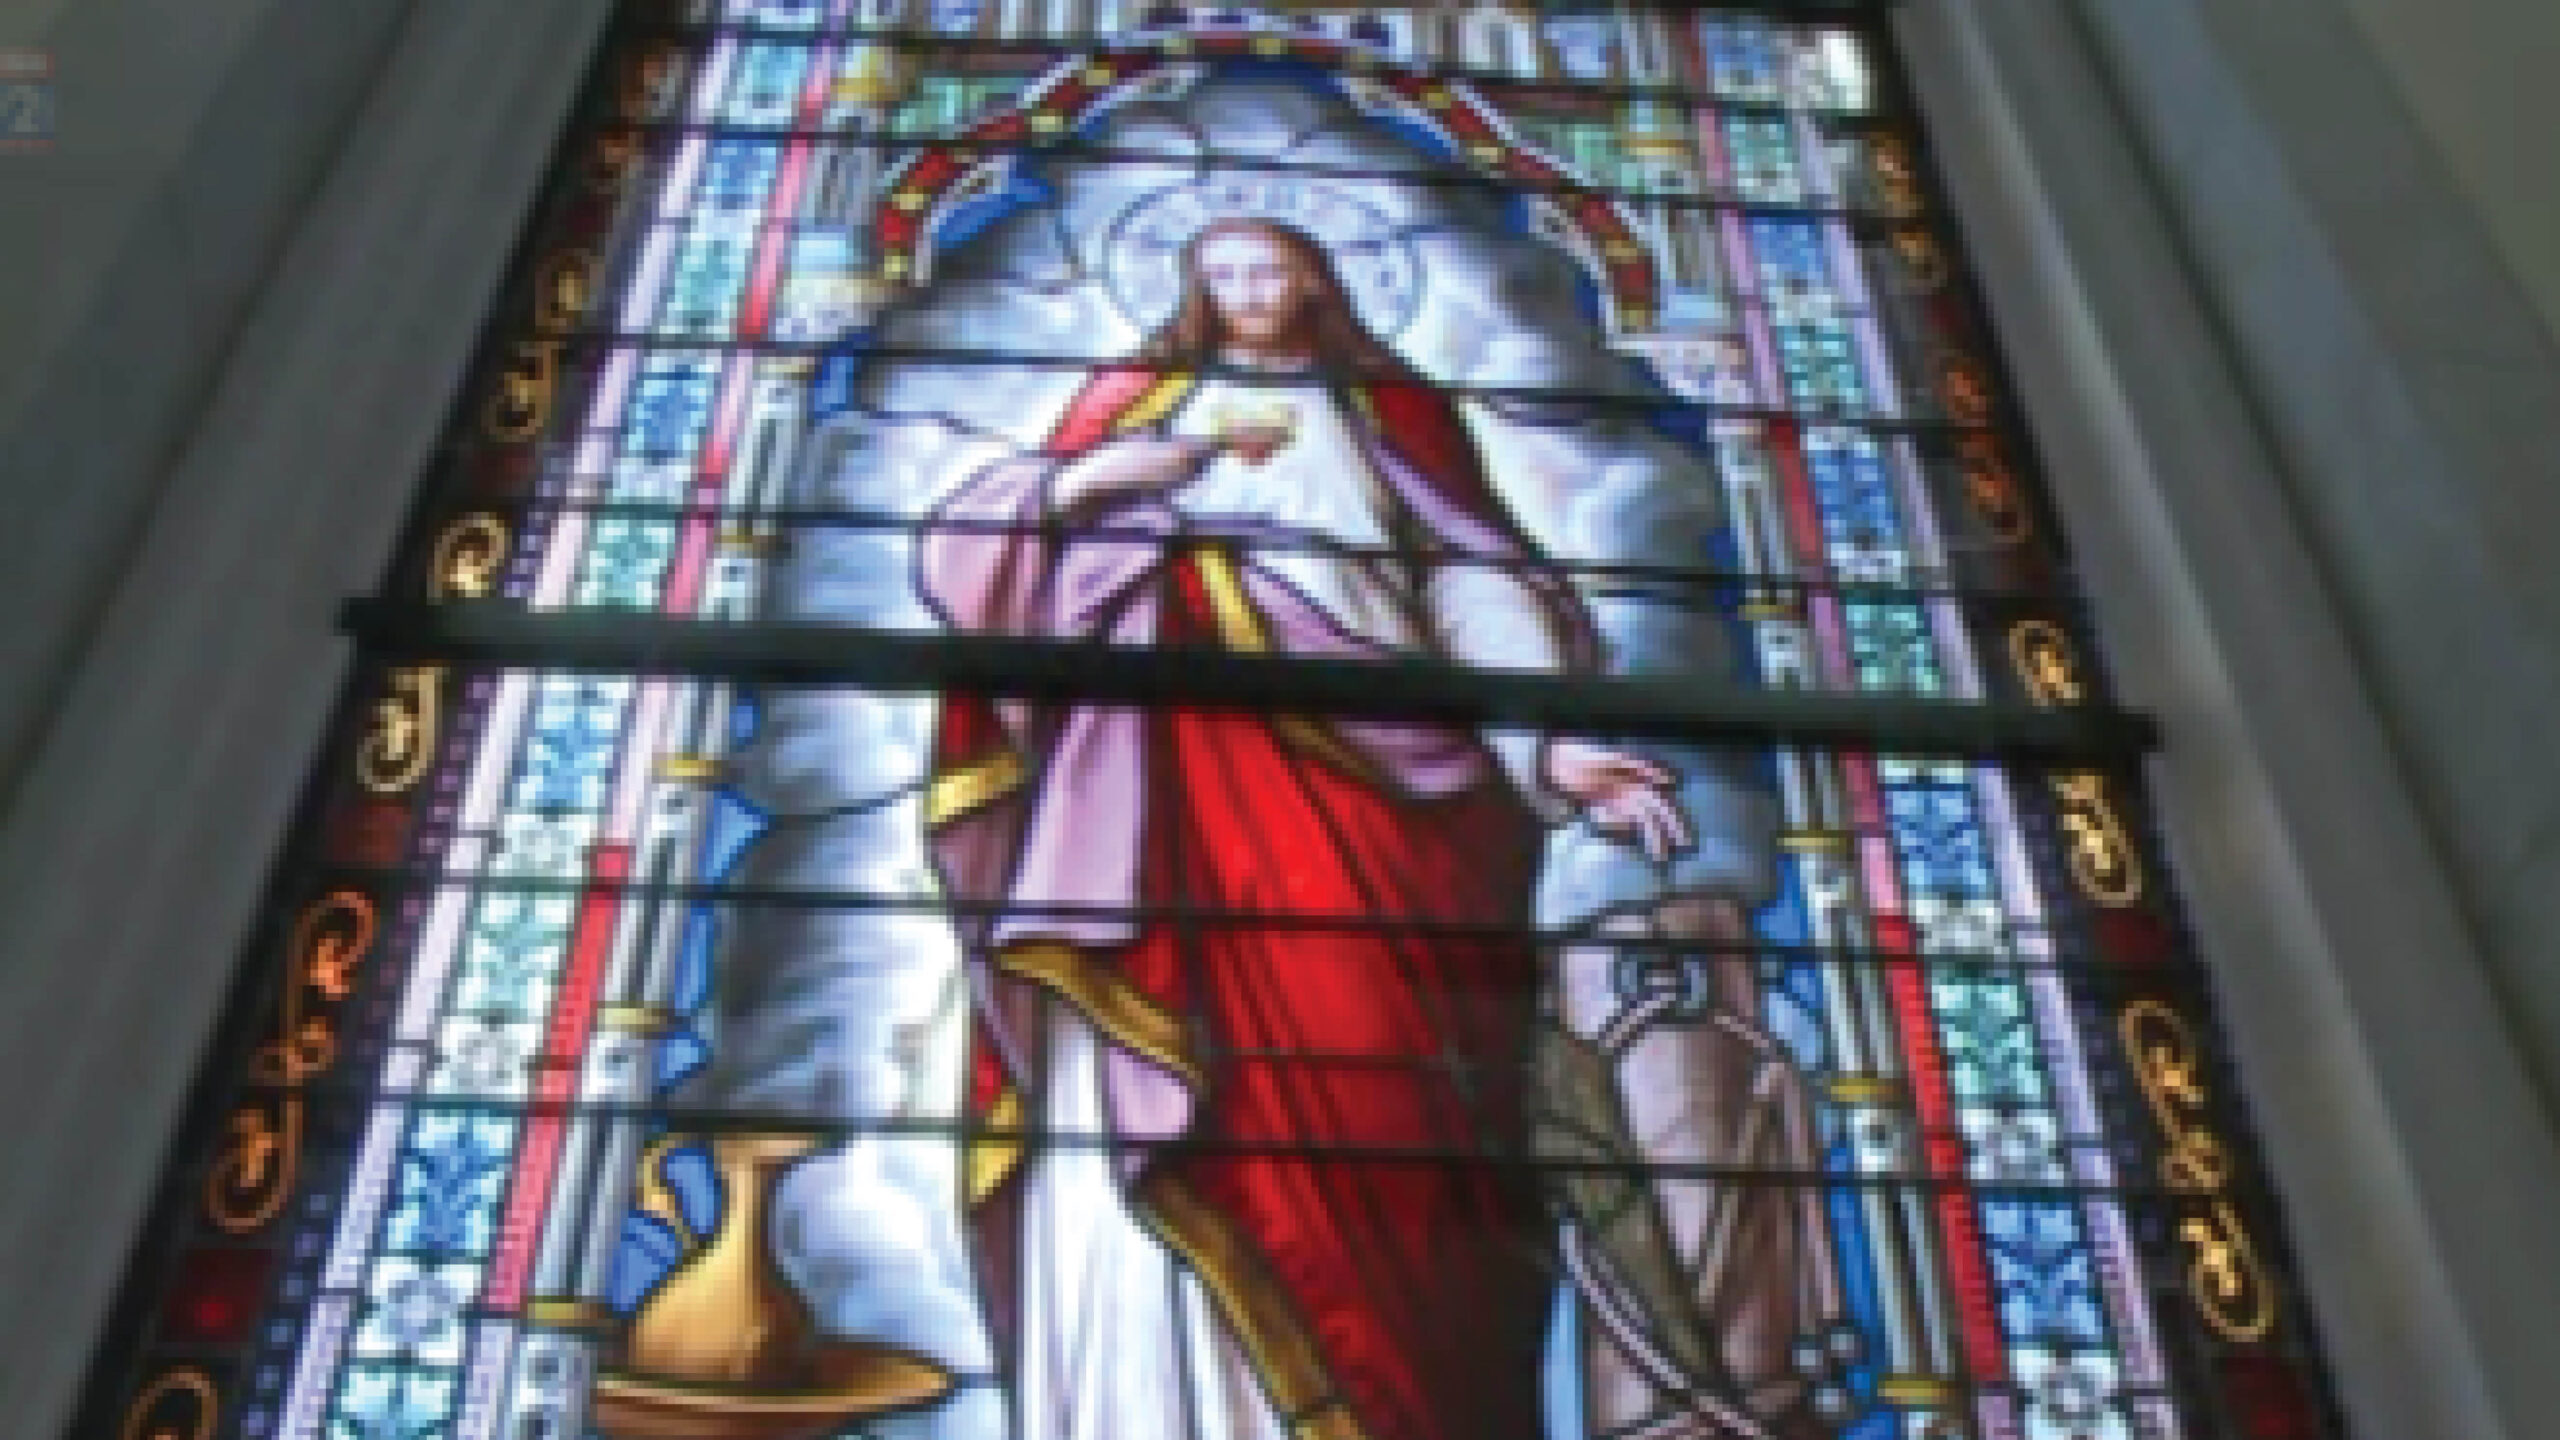 stained glass window with an image of Jesus